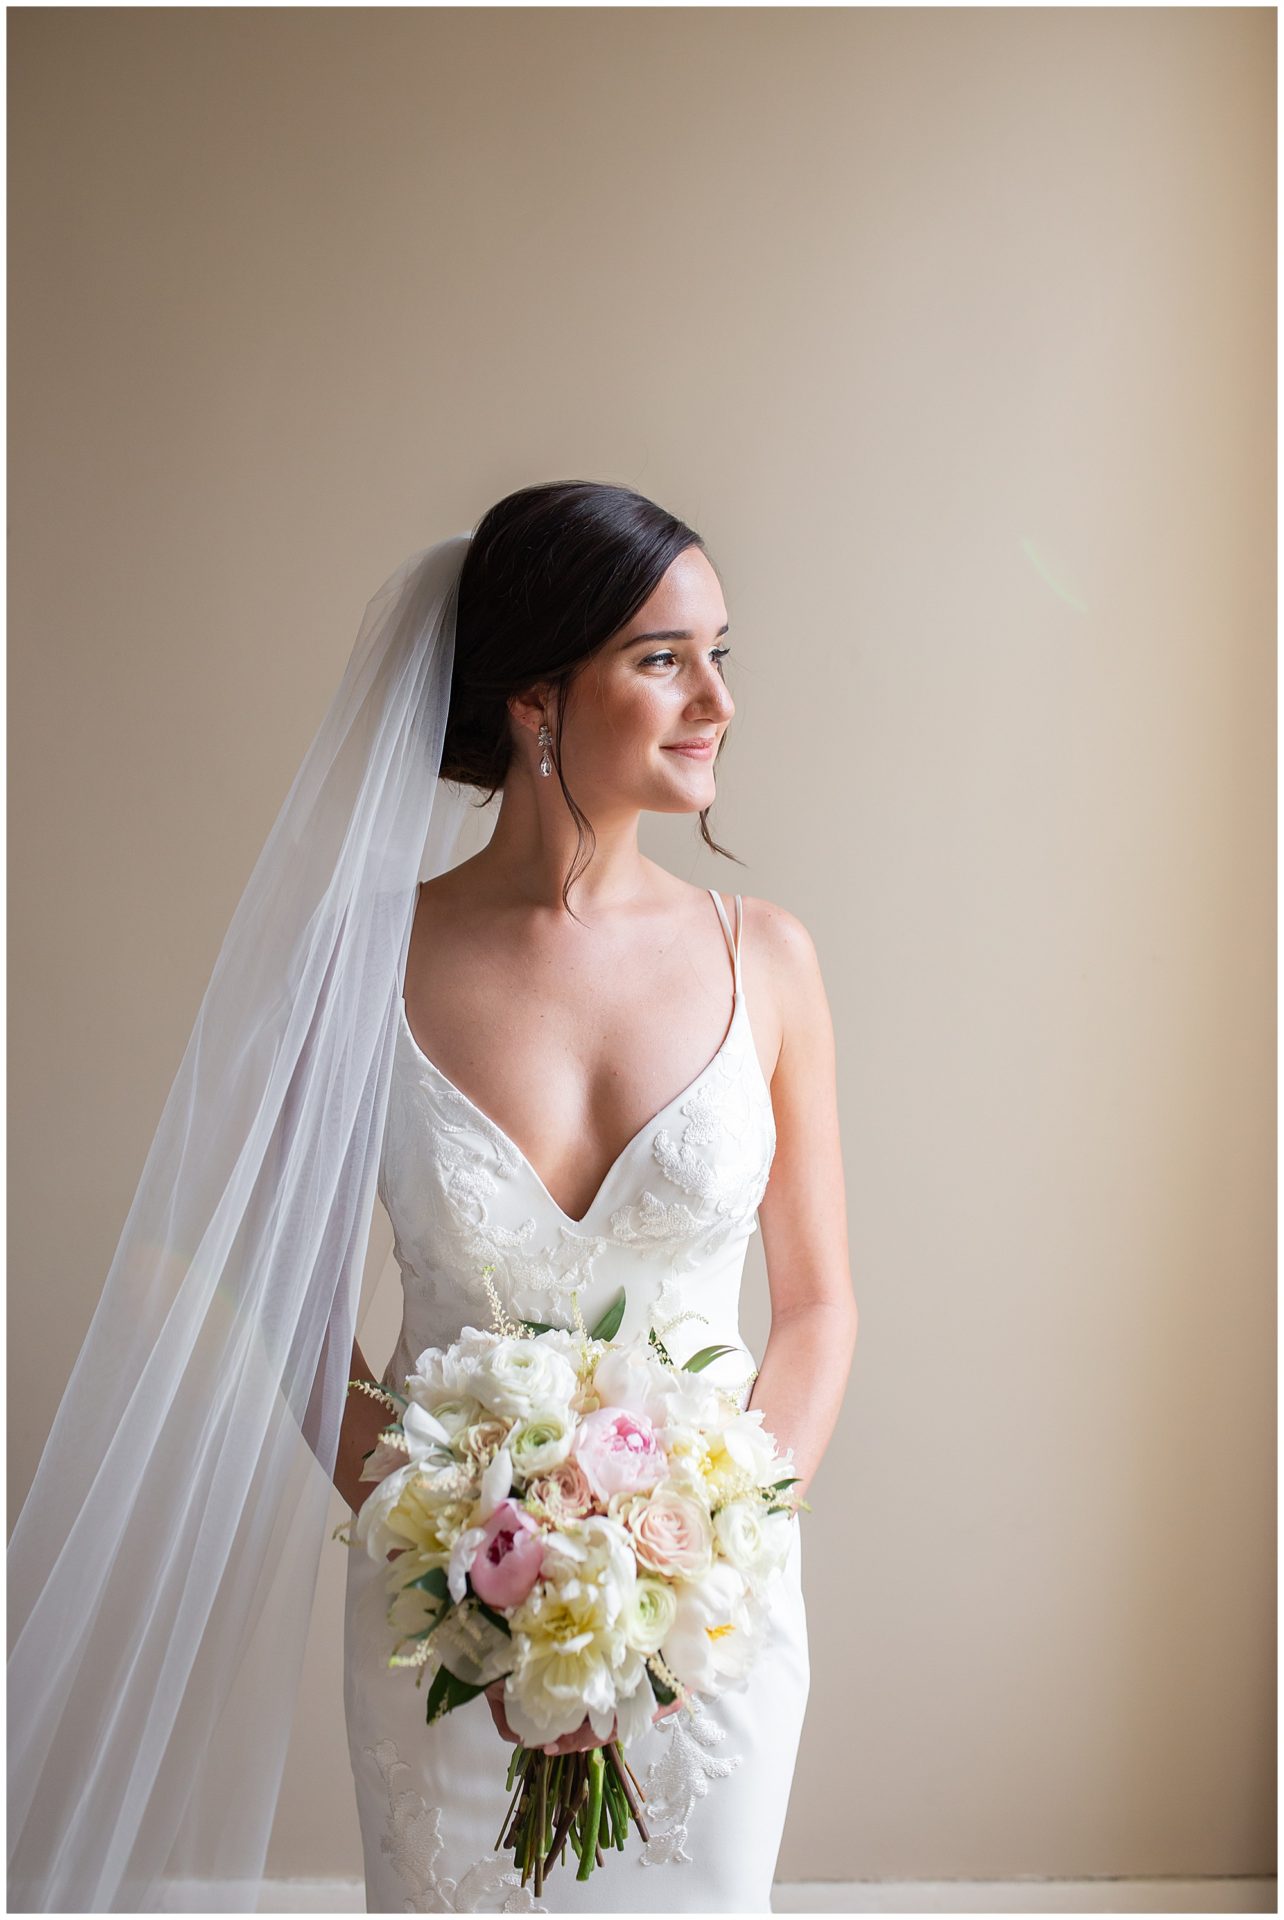 Classic and timeless bridal session portraits at Riverwood Mansion in Nashville by the best Nashville wedding photographer, Melanie Dunn Photography